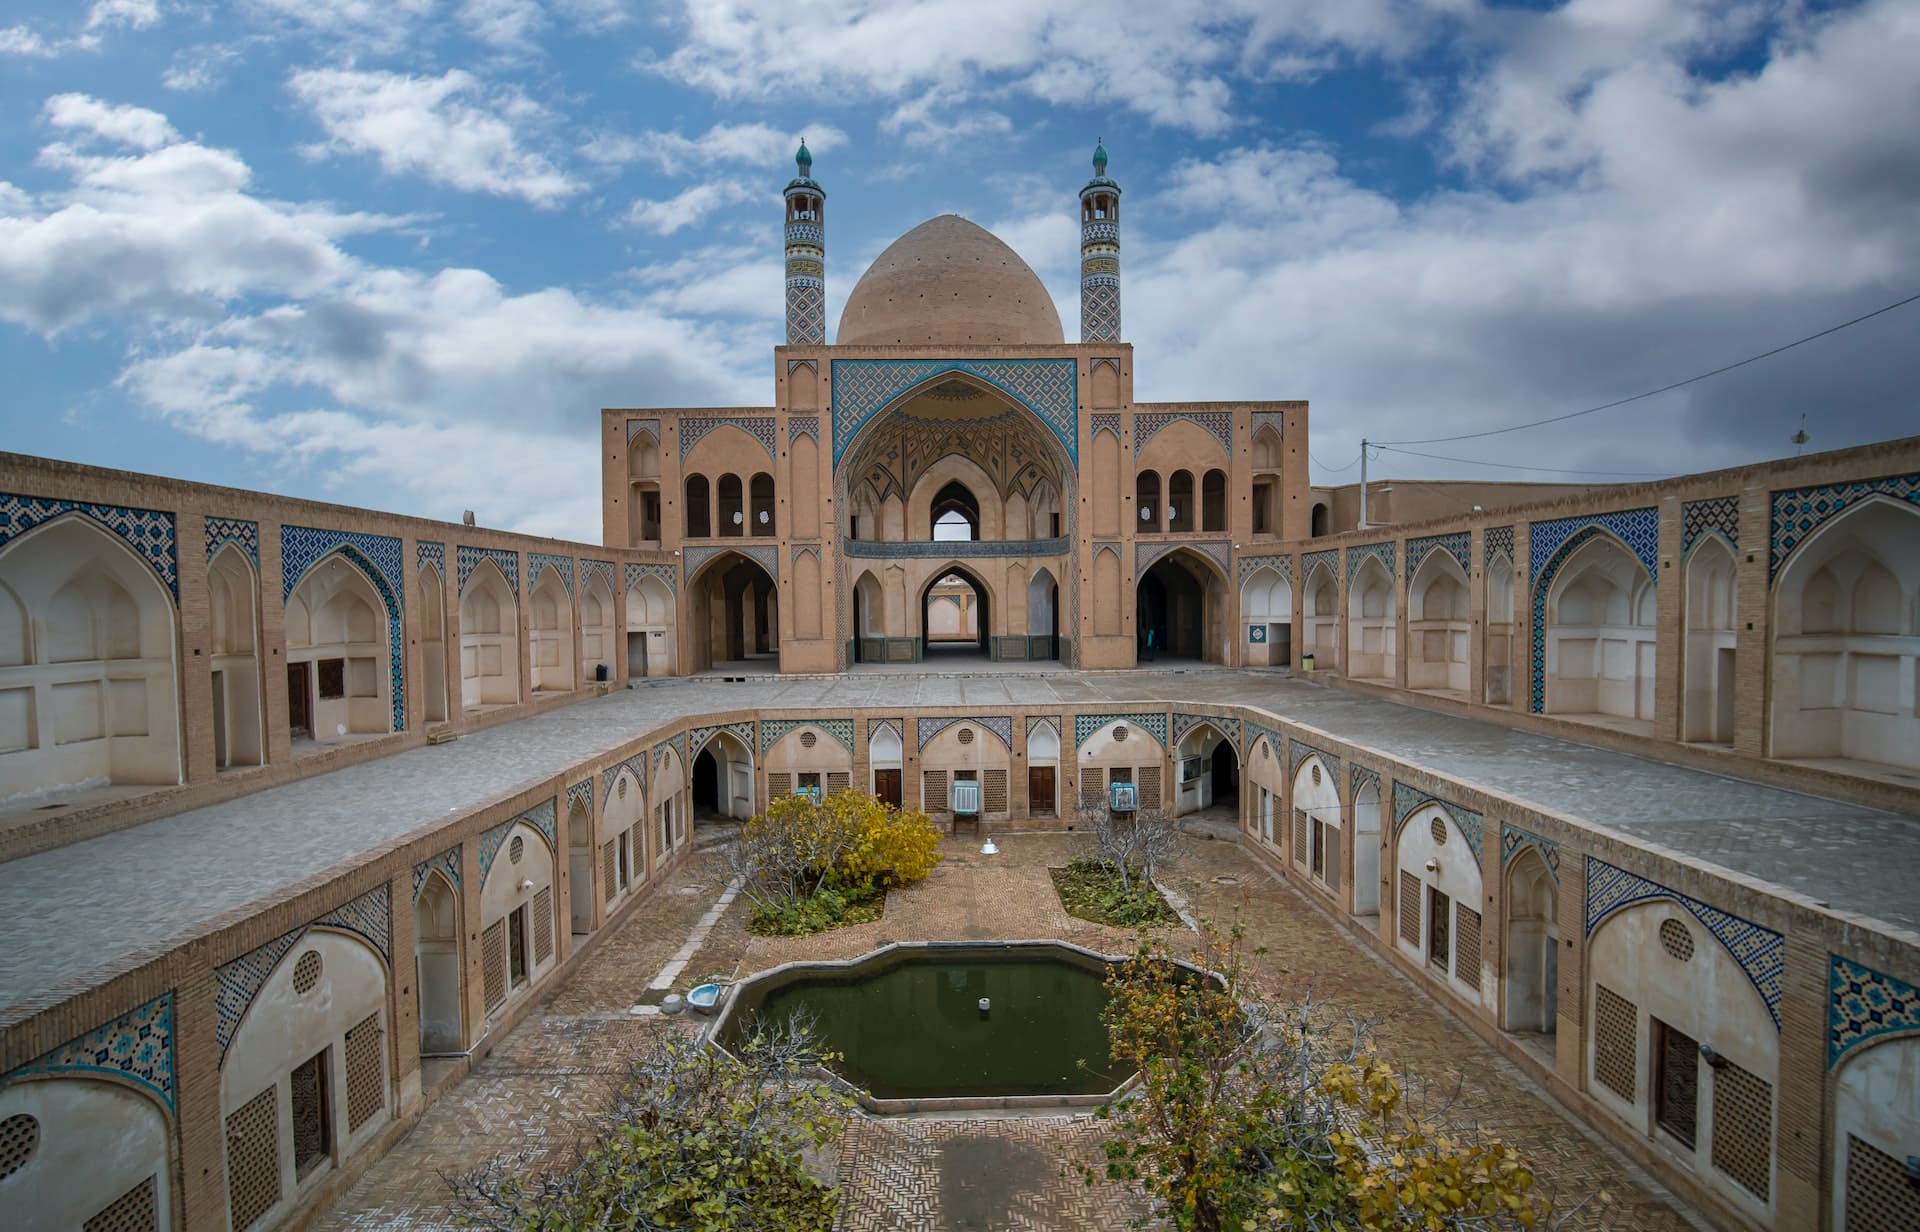 Discover Kashan's ancient architecture